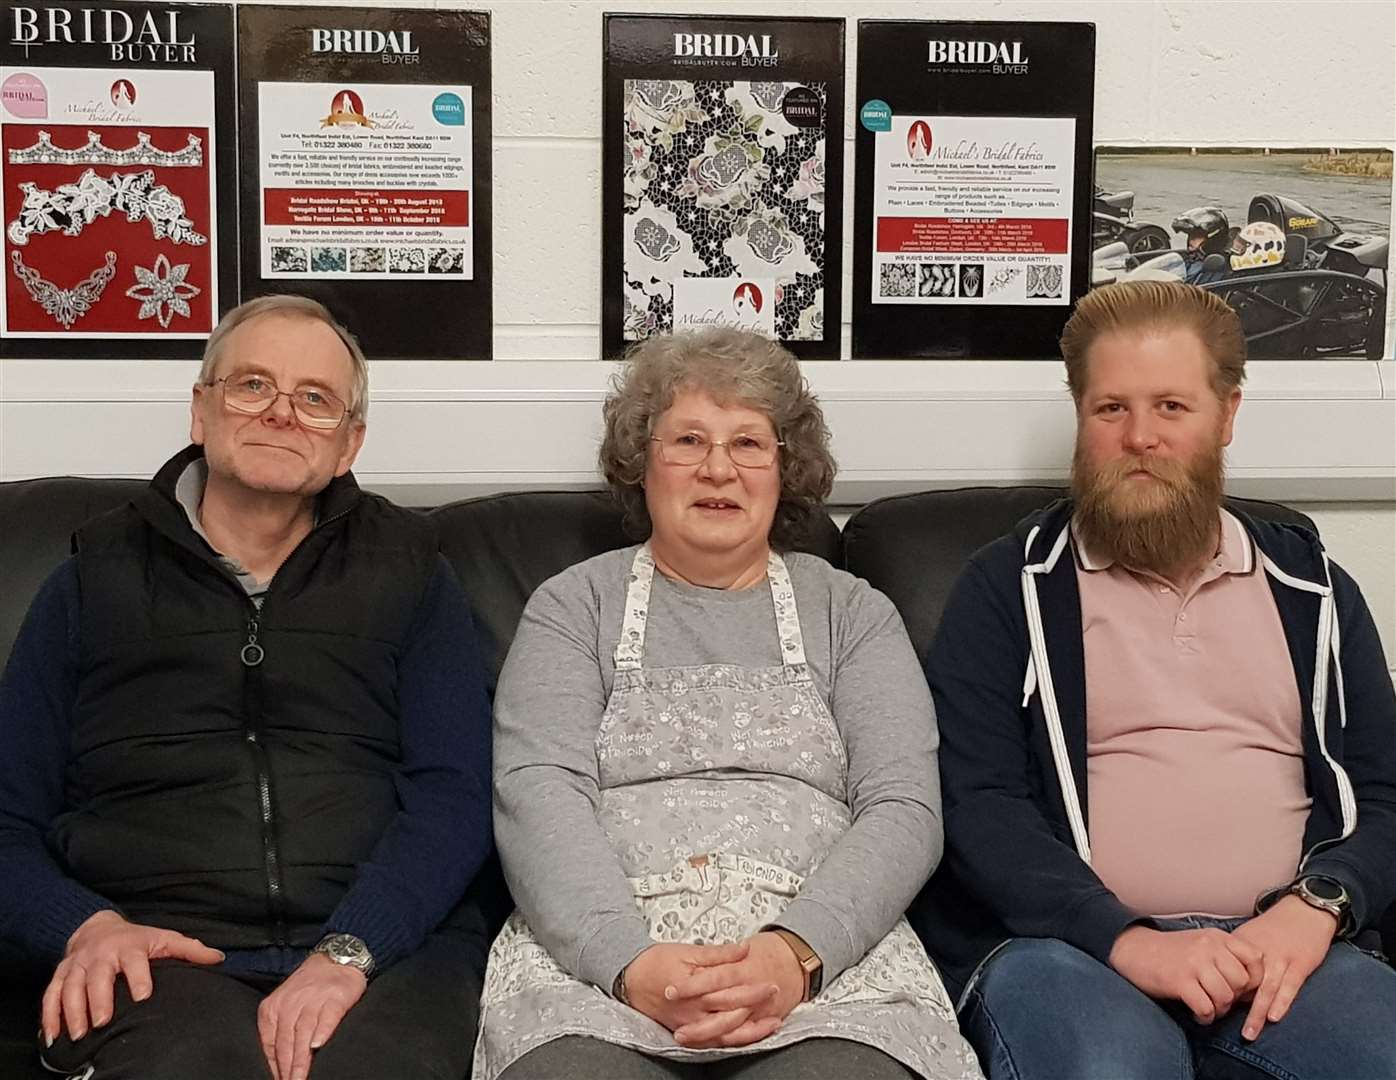 Michael's Bridal Fabrics has 15 full-time staff, of which seven are family members. Pictured are, from left, Michael Bristow, Lynn Bristow and Barry Bristow